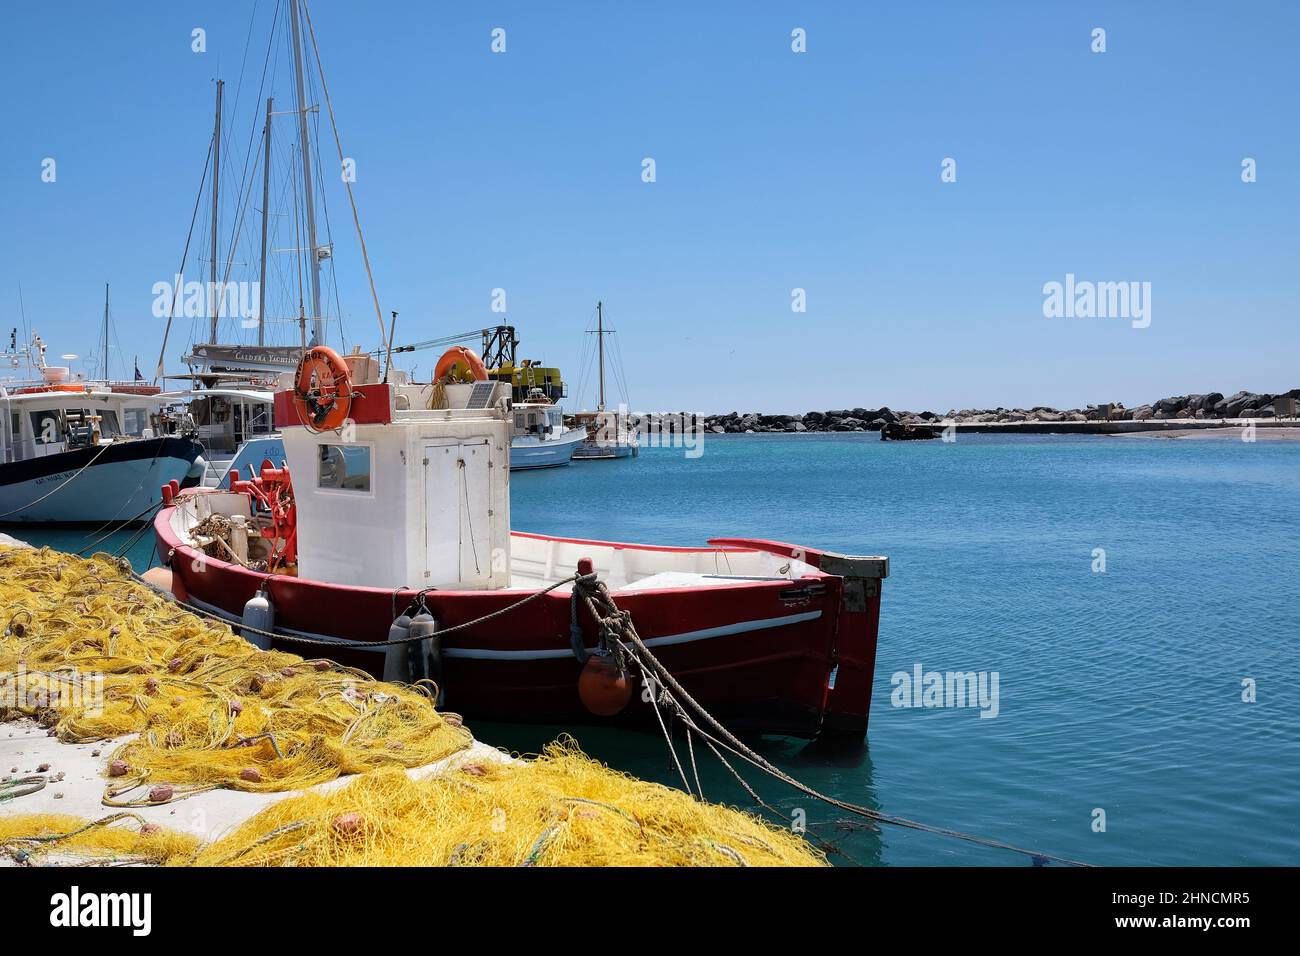 View of a fishboat and fishnets next to it at a small harbor in Santorini Greece Stock Photo